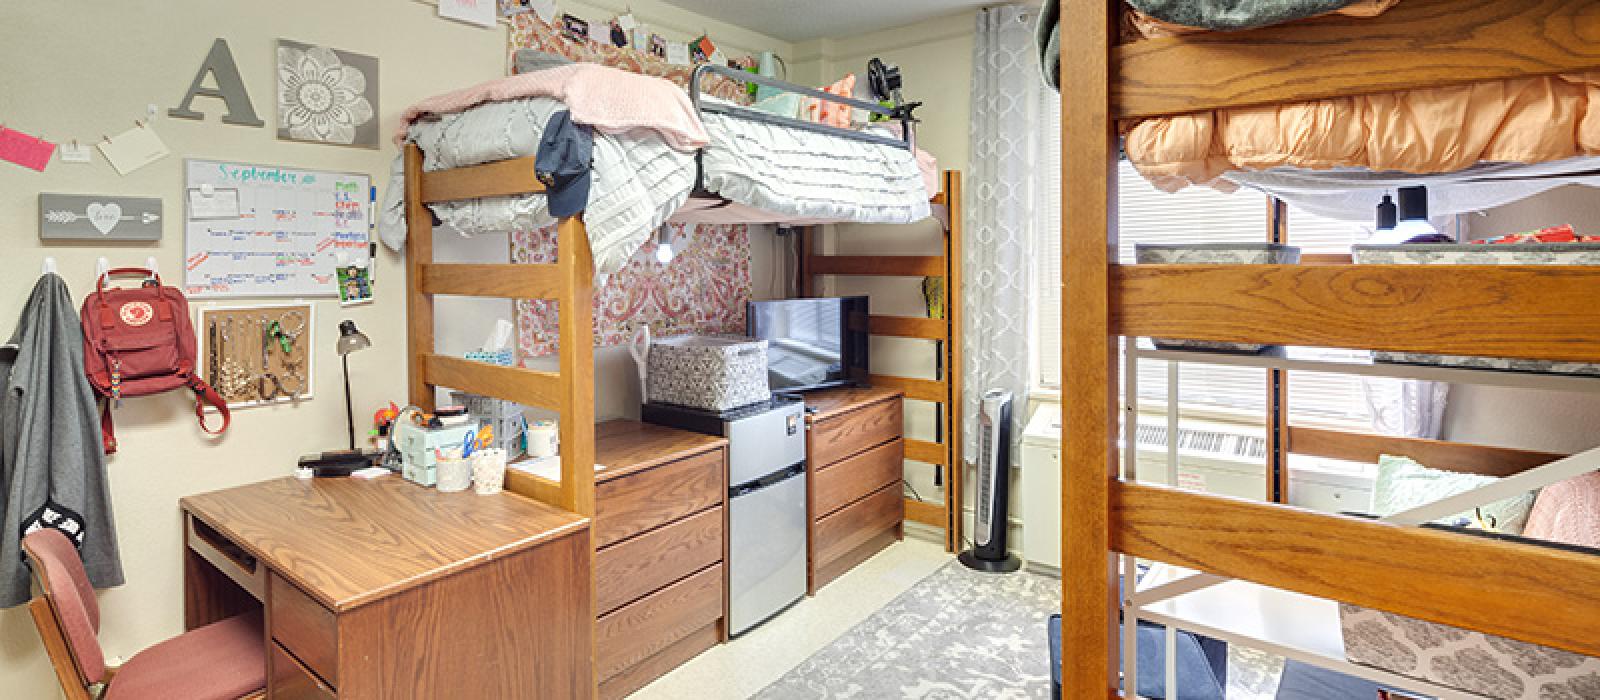 Bedroom with a high bed with appliances and drawers underneath it, a bunk bed, and a desk with a chair..